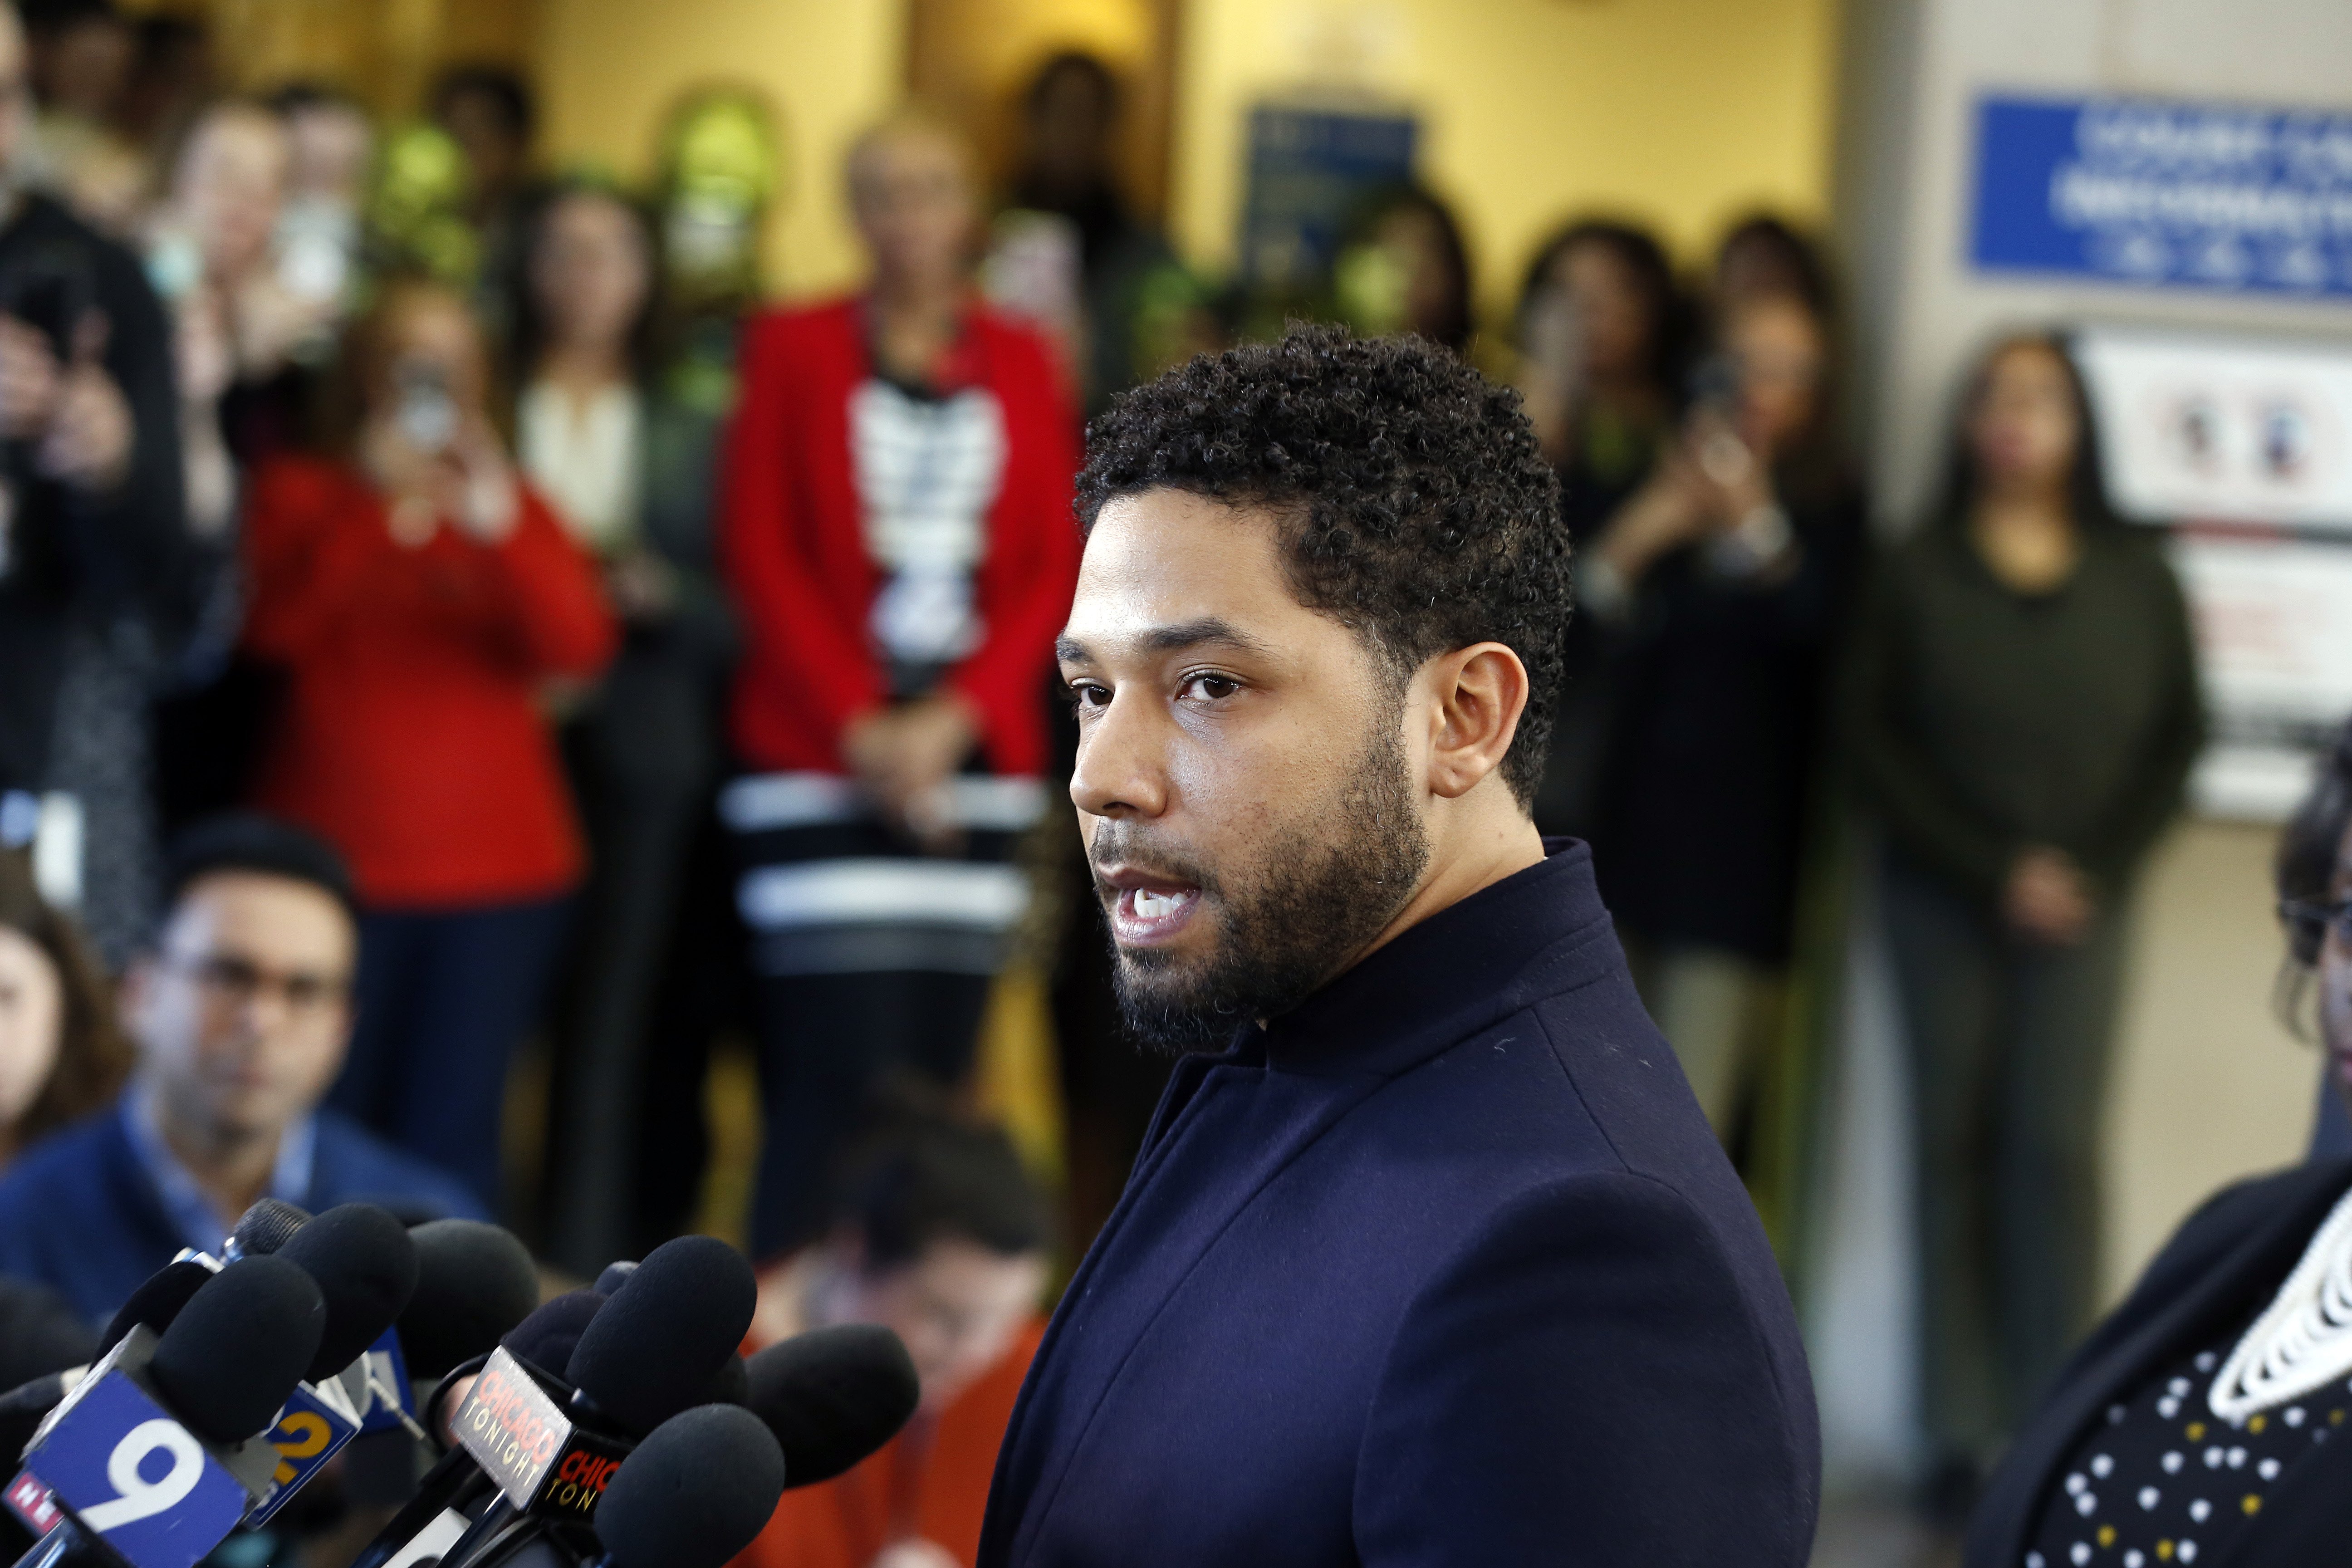 Jussie Smollett speaks after his court appearance at Leighton Courthouse on March 26, 2019 in Chicago, Illinois | Photo: Getty Images